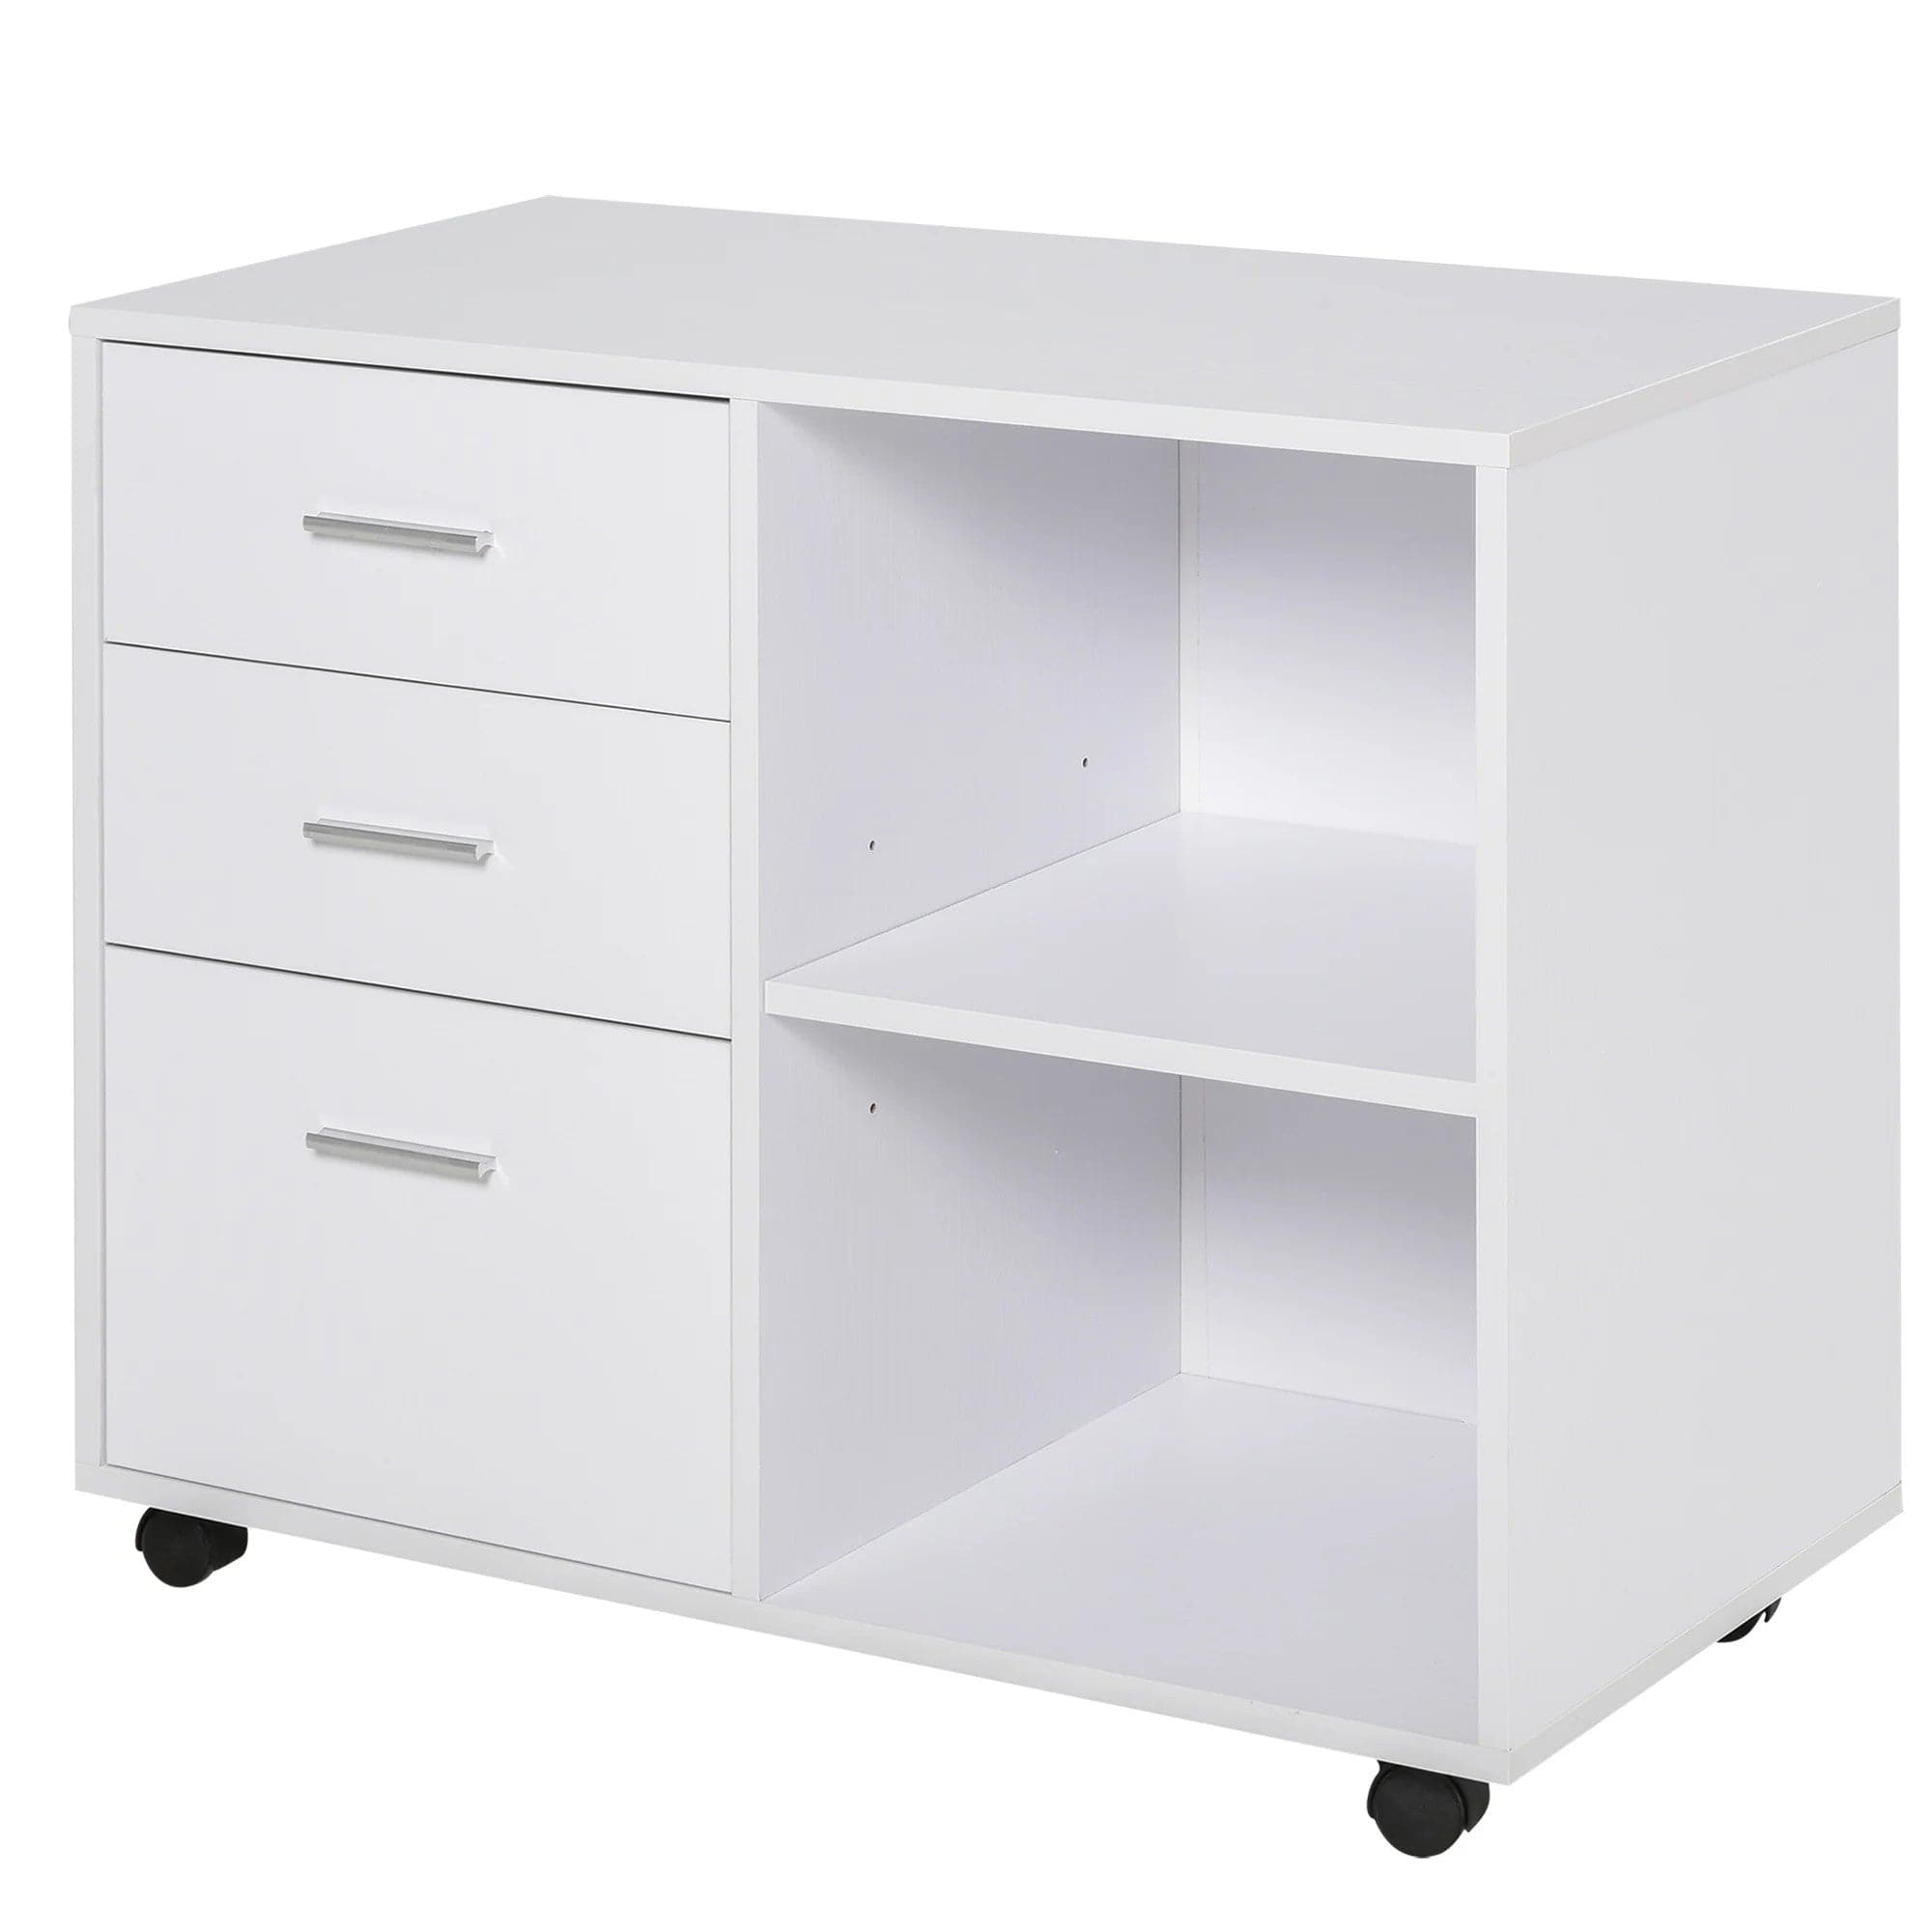 ProperAV Extra Particle Board Rolling Storage Cabinet (White)